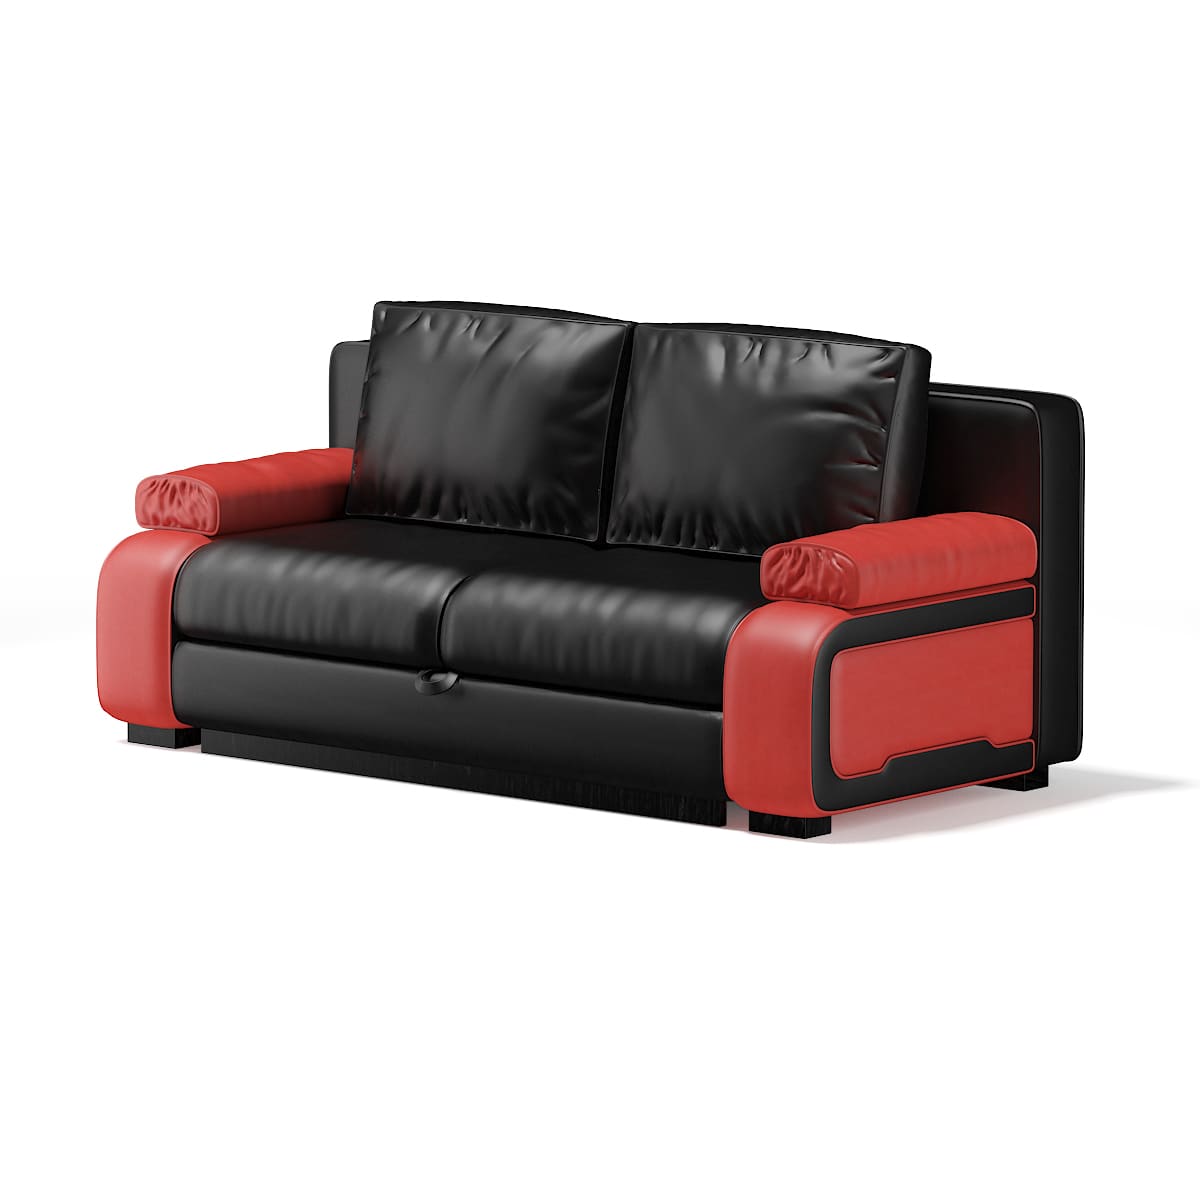 Black And Red Leather Sofa, Dark Red Leather Couch